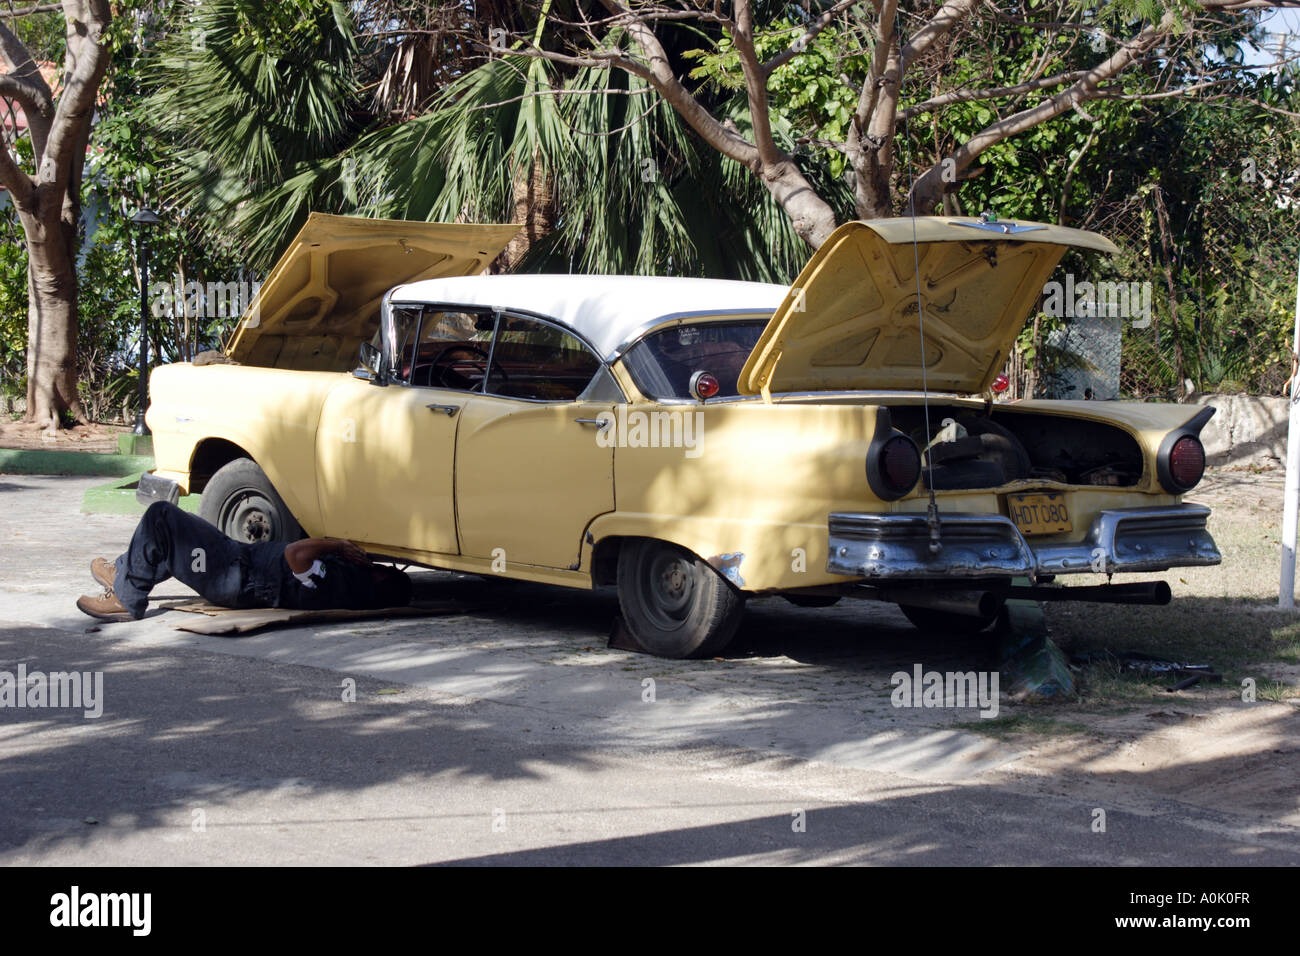 Maintenance is key to keeping the Classic American cars on the Cuban Roads Stock Photo